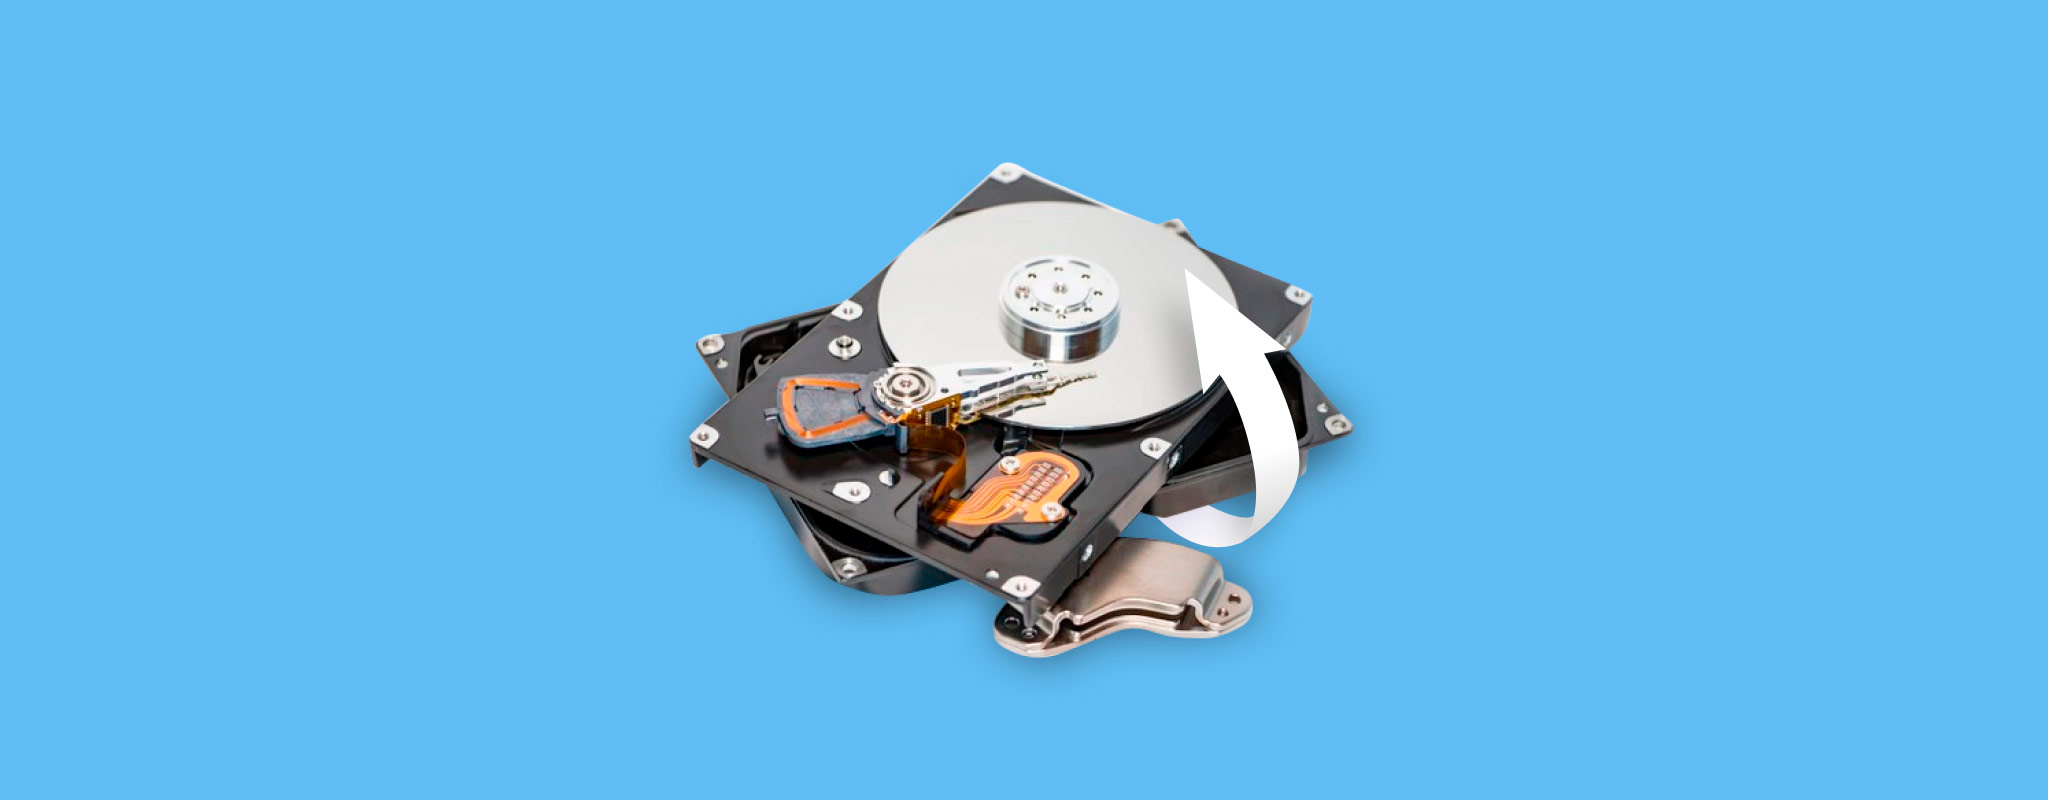 tub Vandret hvid How to Easily Recover Data from a Dead Hard Drive on Windows